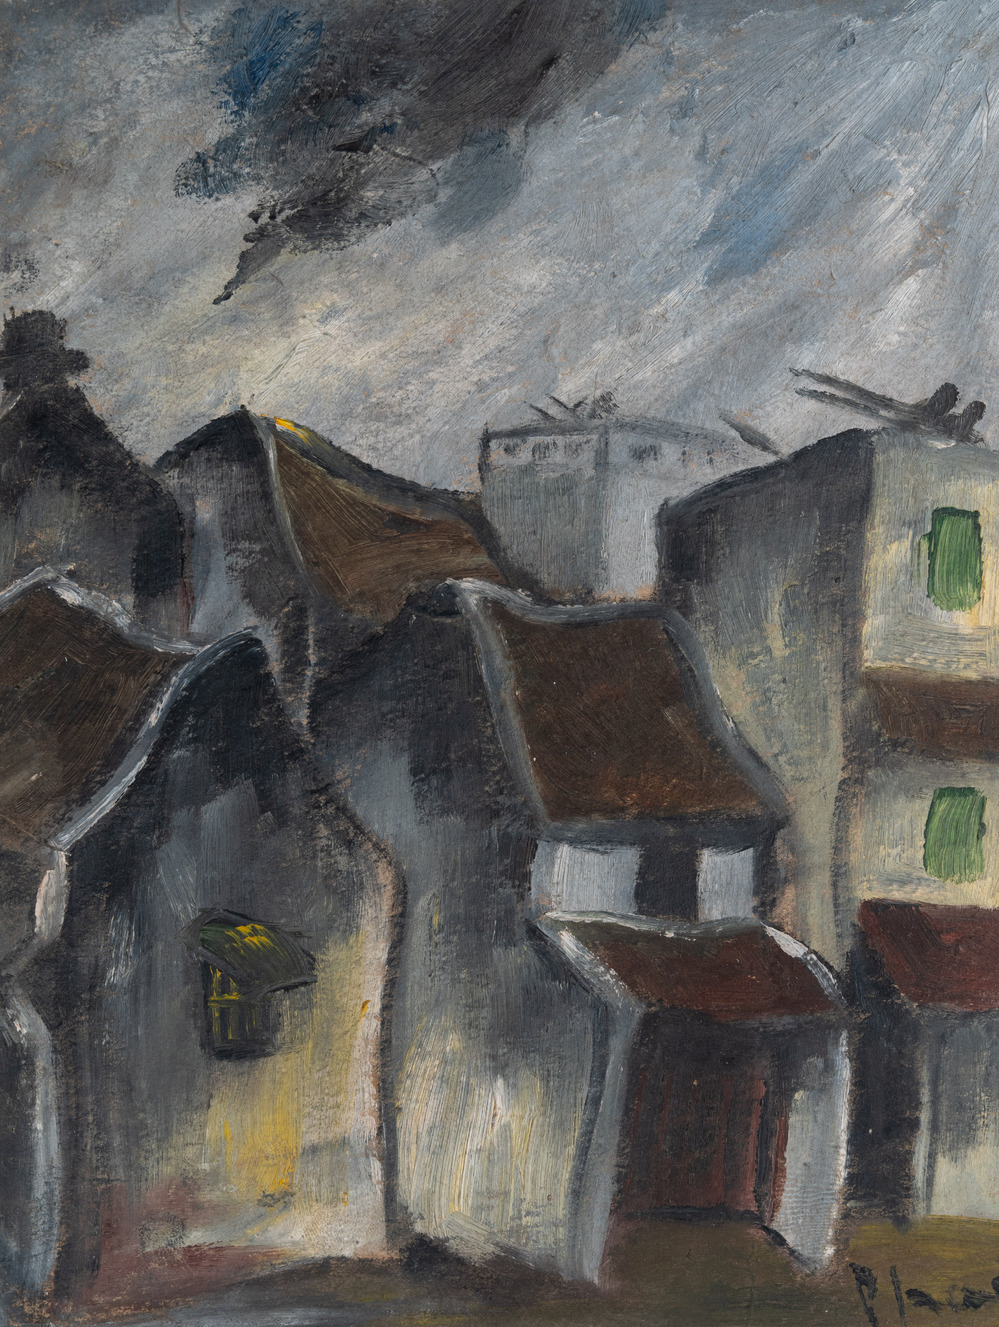 Bui Xuan Phai (Vietnam, 1920-1988): 'War planes above old Hanoi houses', oil on paper, ca. 1972